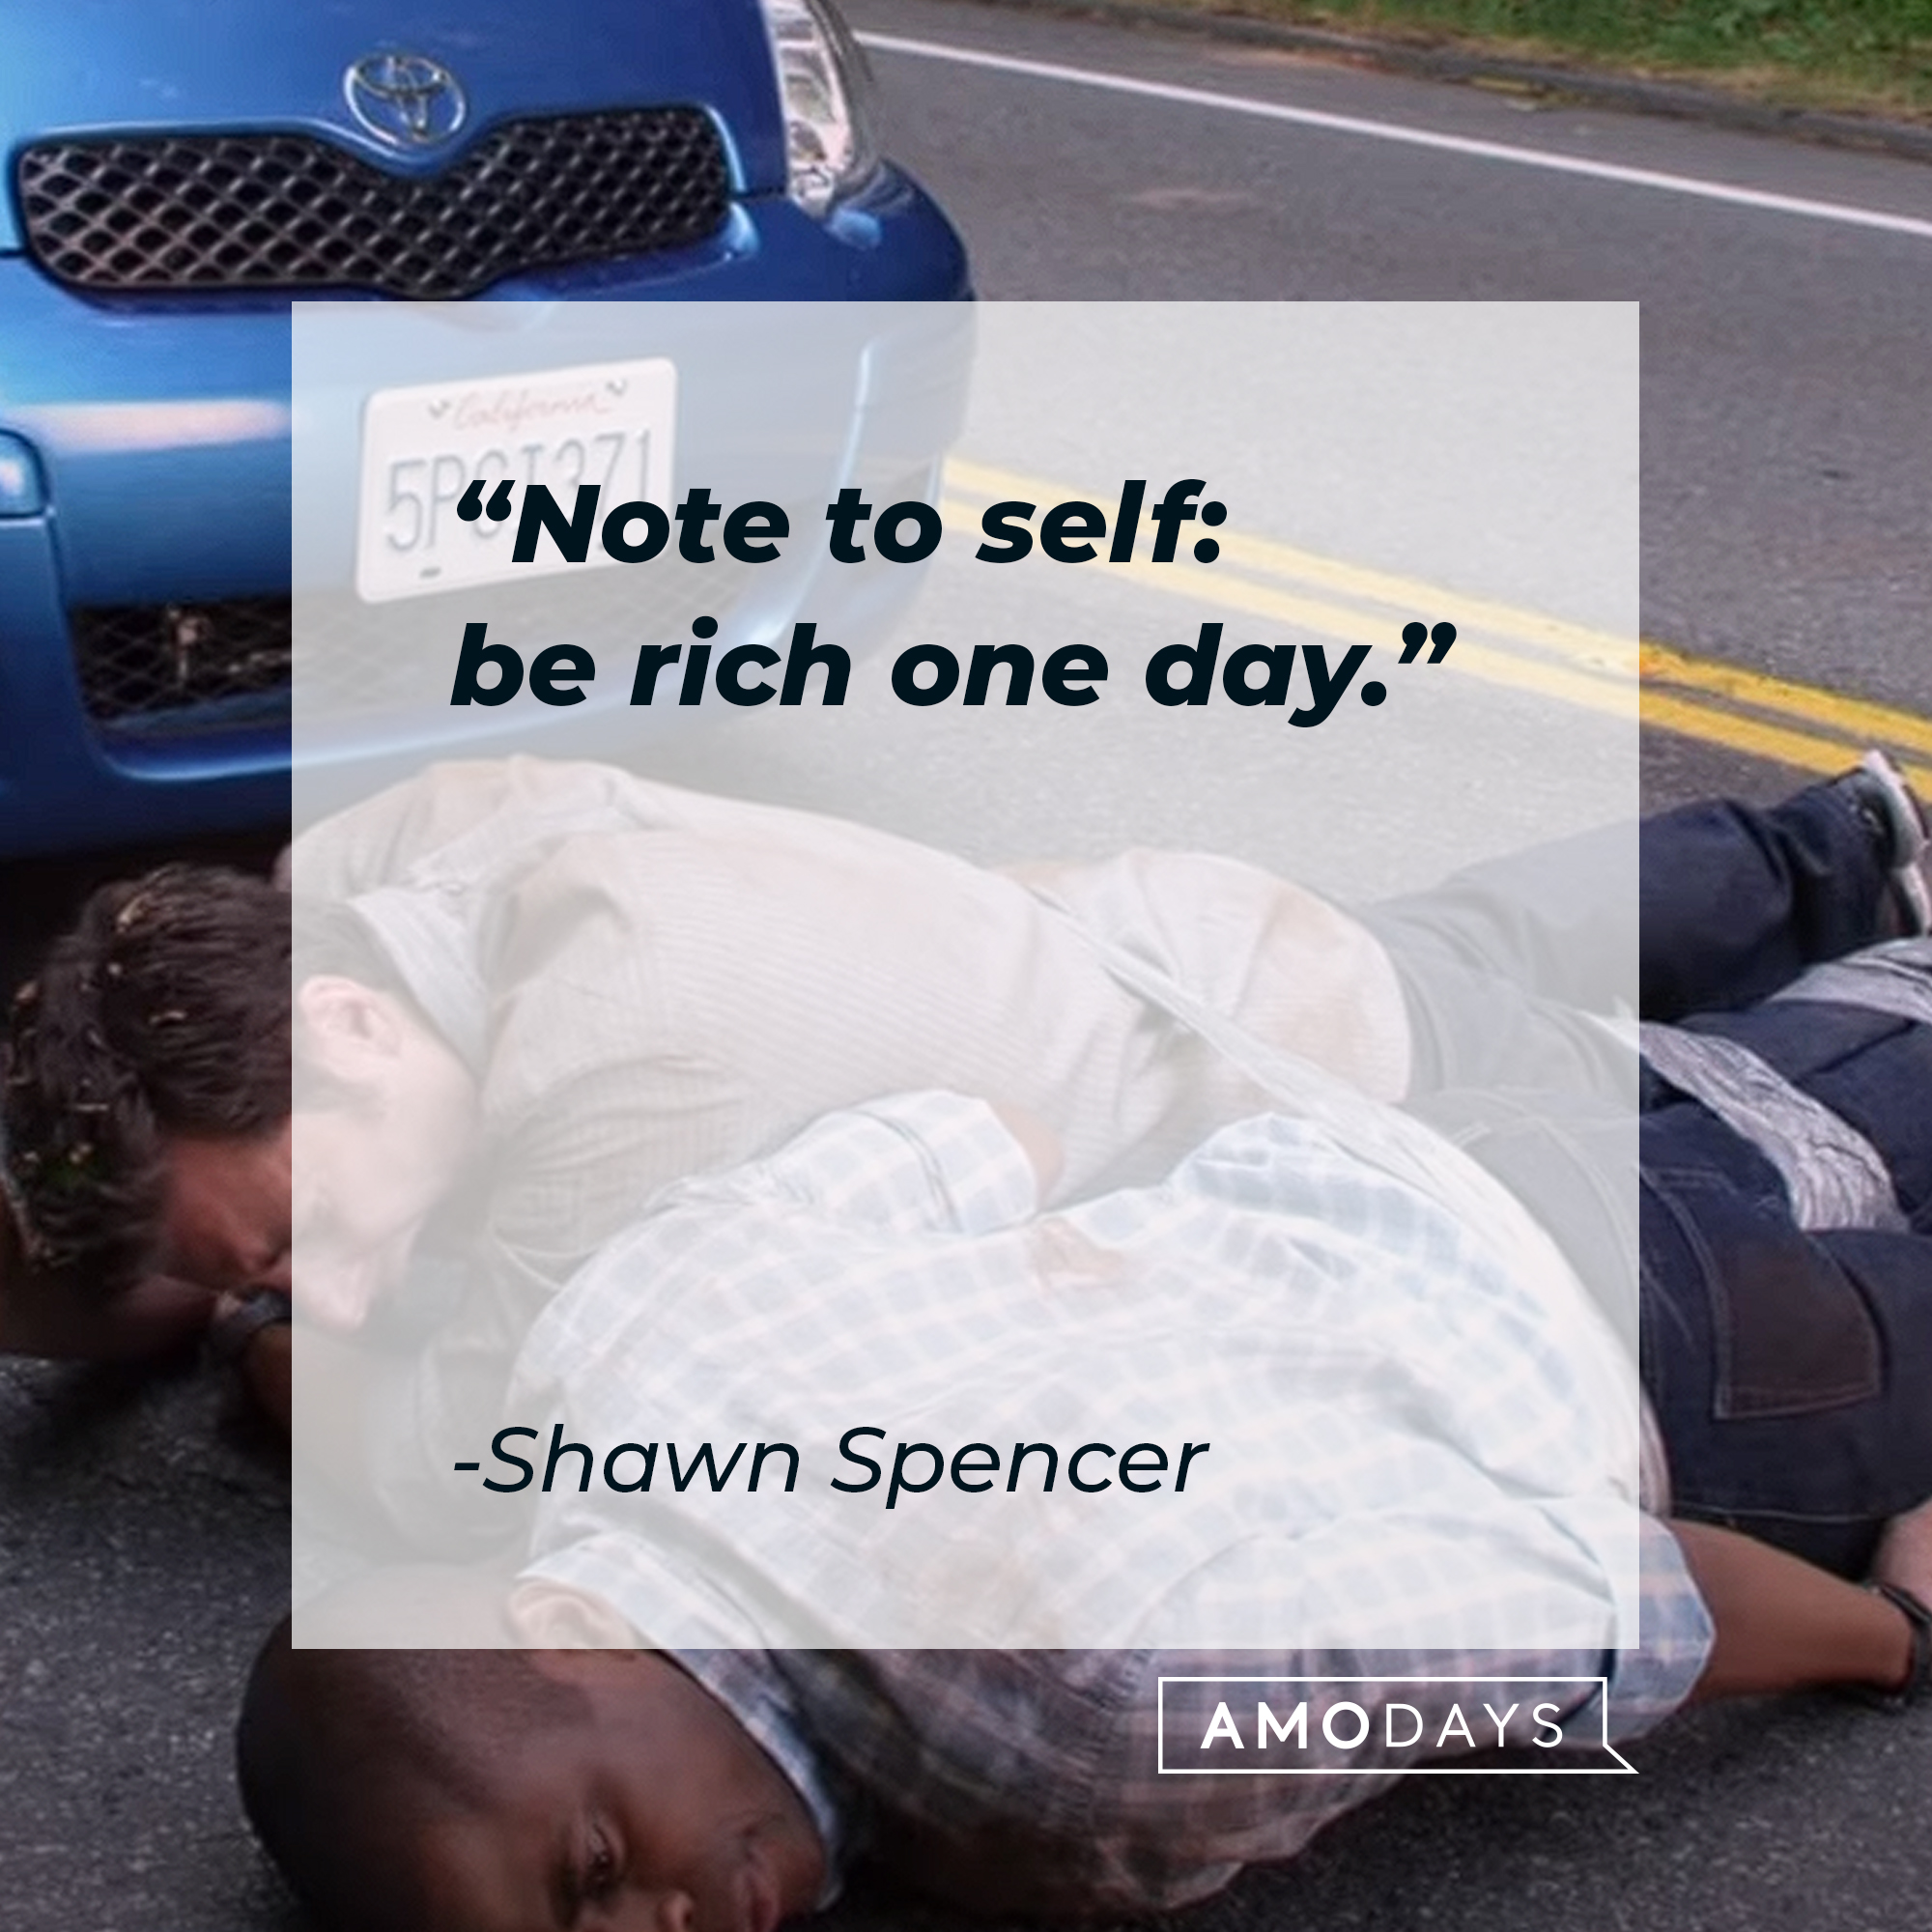 Shawn Spencer's quote: "Note to self: be rich one day." | Source: youtube.com/Psych